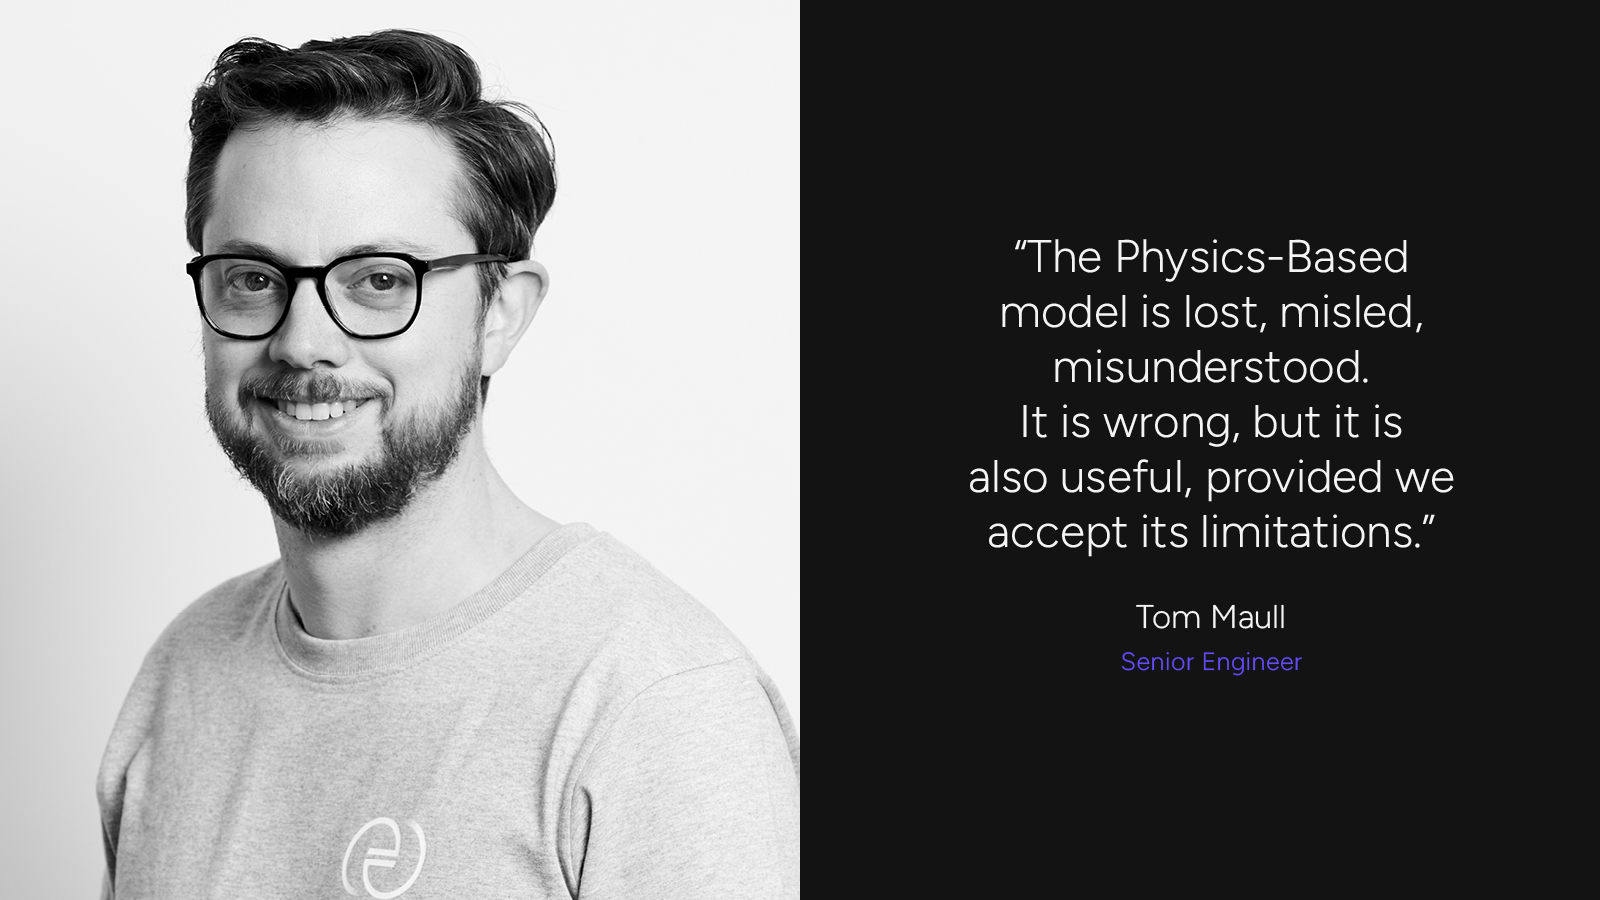 "The Physics-Based model is lost, misled, misunderstood. It is wrong, but it is also useful, provided we accept it's limitations" Tom Maull, Senior Engineer